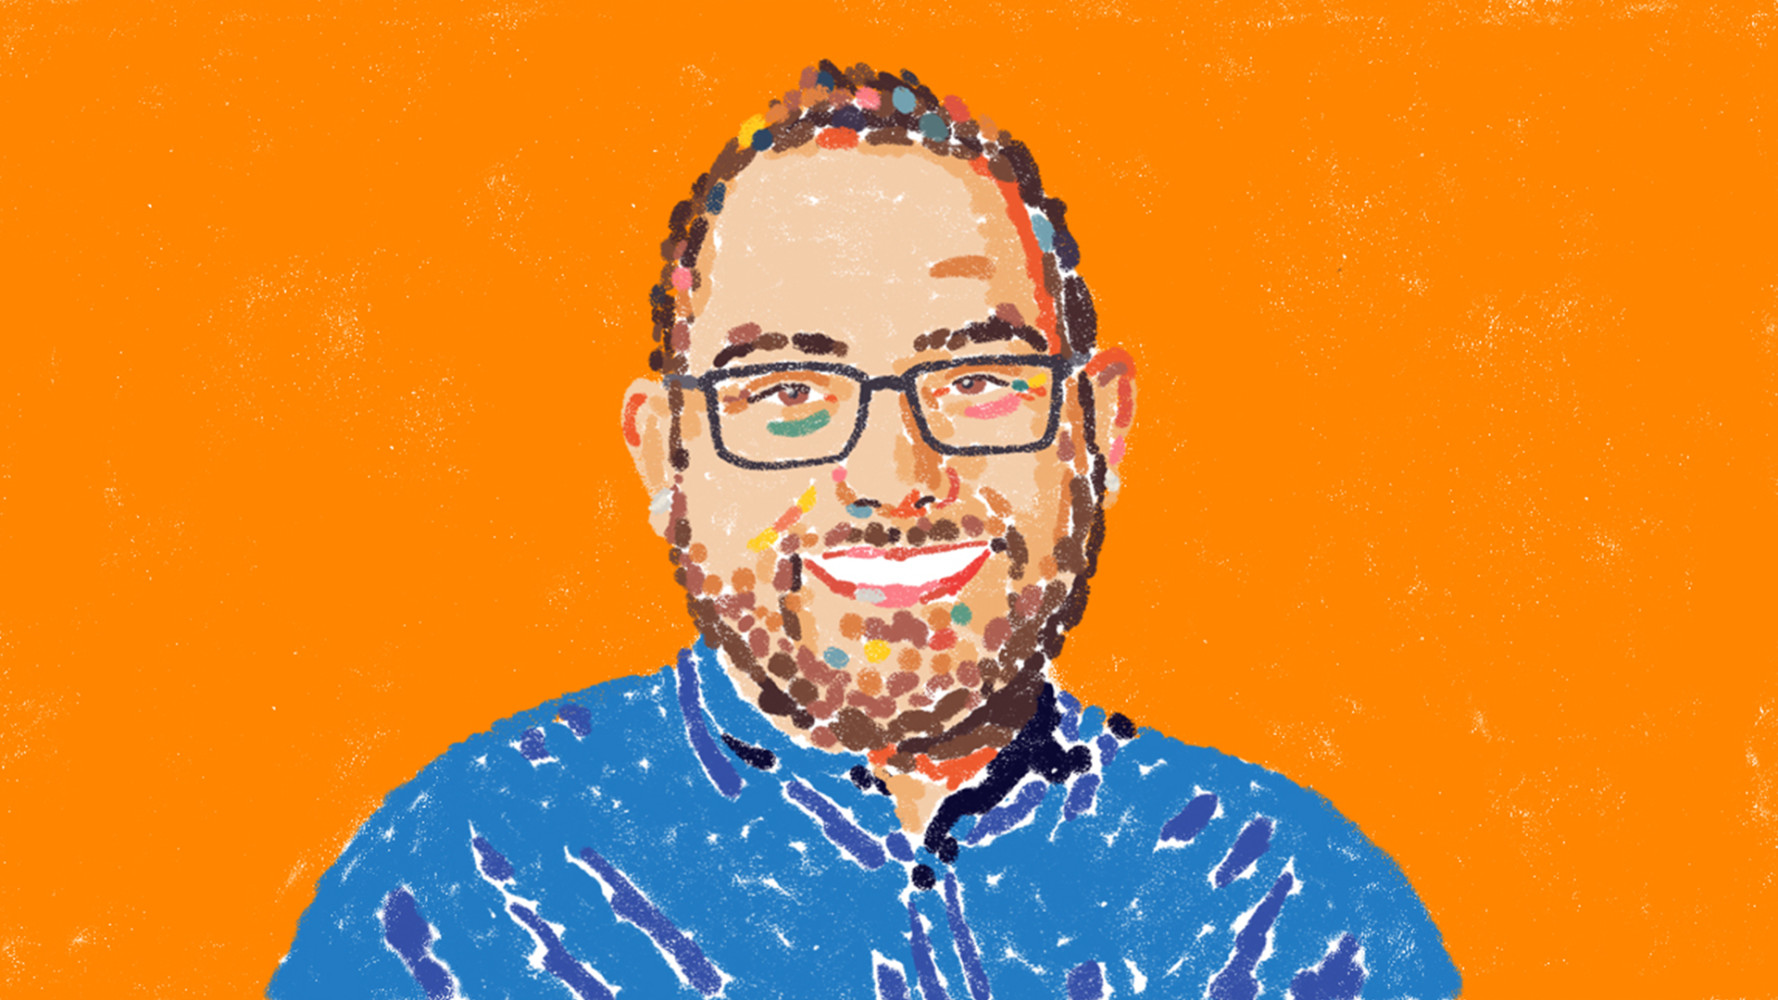 Illustrated portrait of a smiling bearded man wearing a blue shirt and glasses on an orange background.